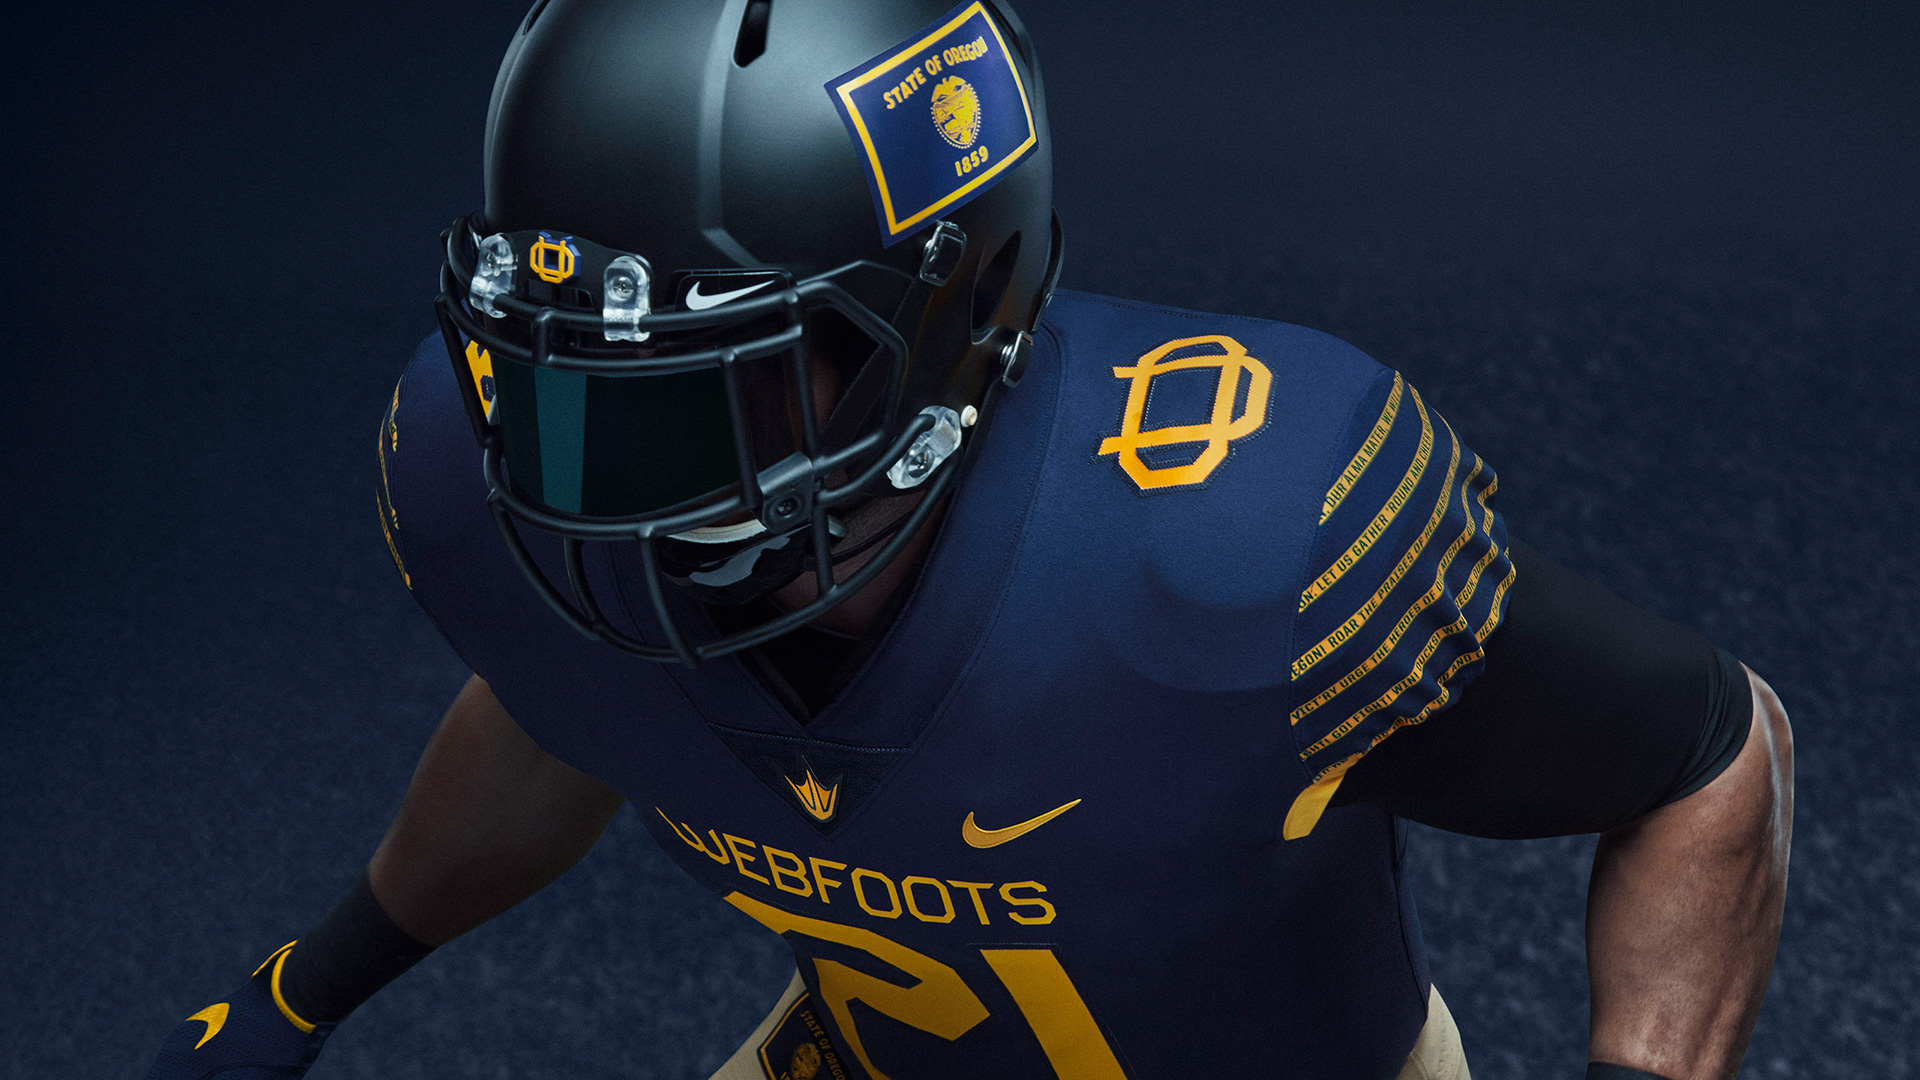 Ducks will become 'Webfoots' with sick alternate uniforms ...